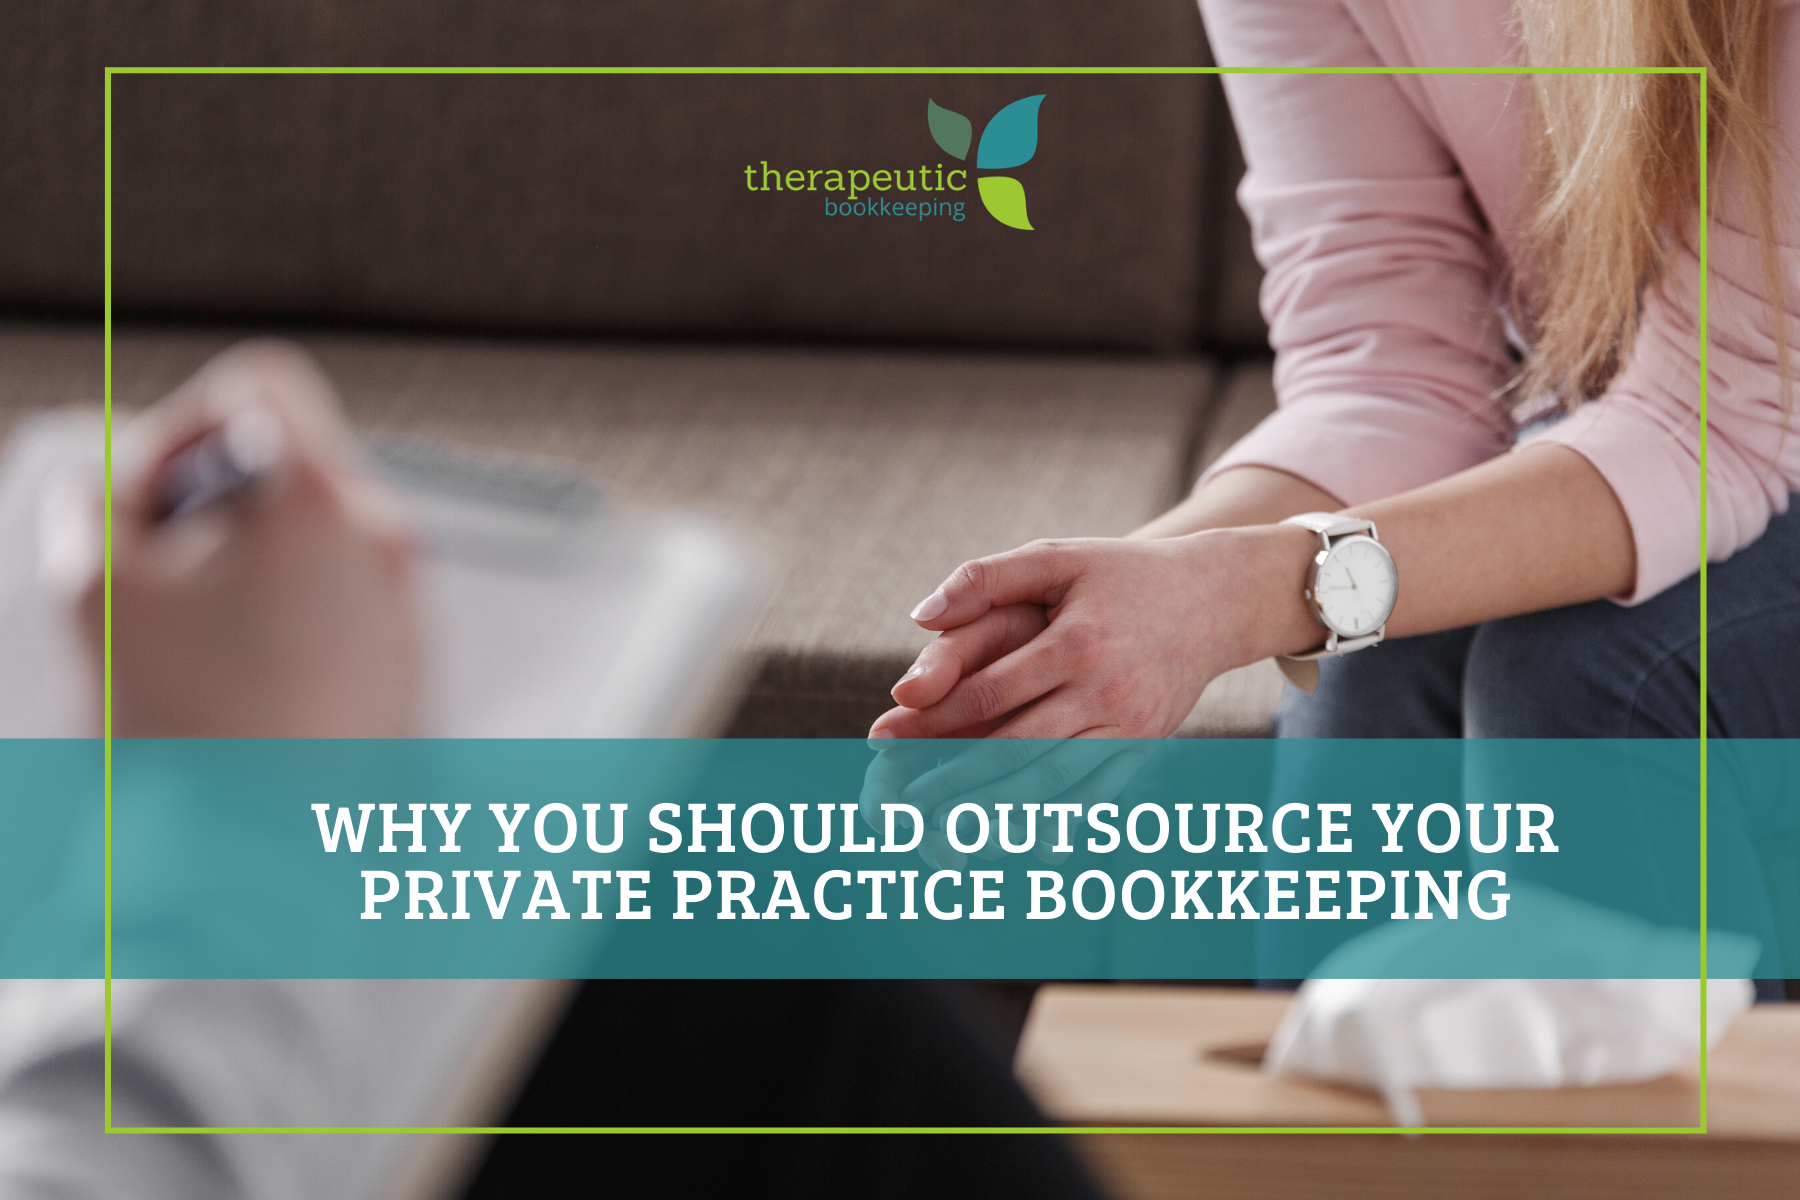 Why You Should Outsource Your Private Practice Bookkeeping